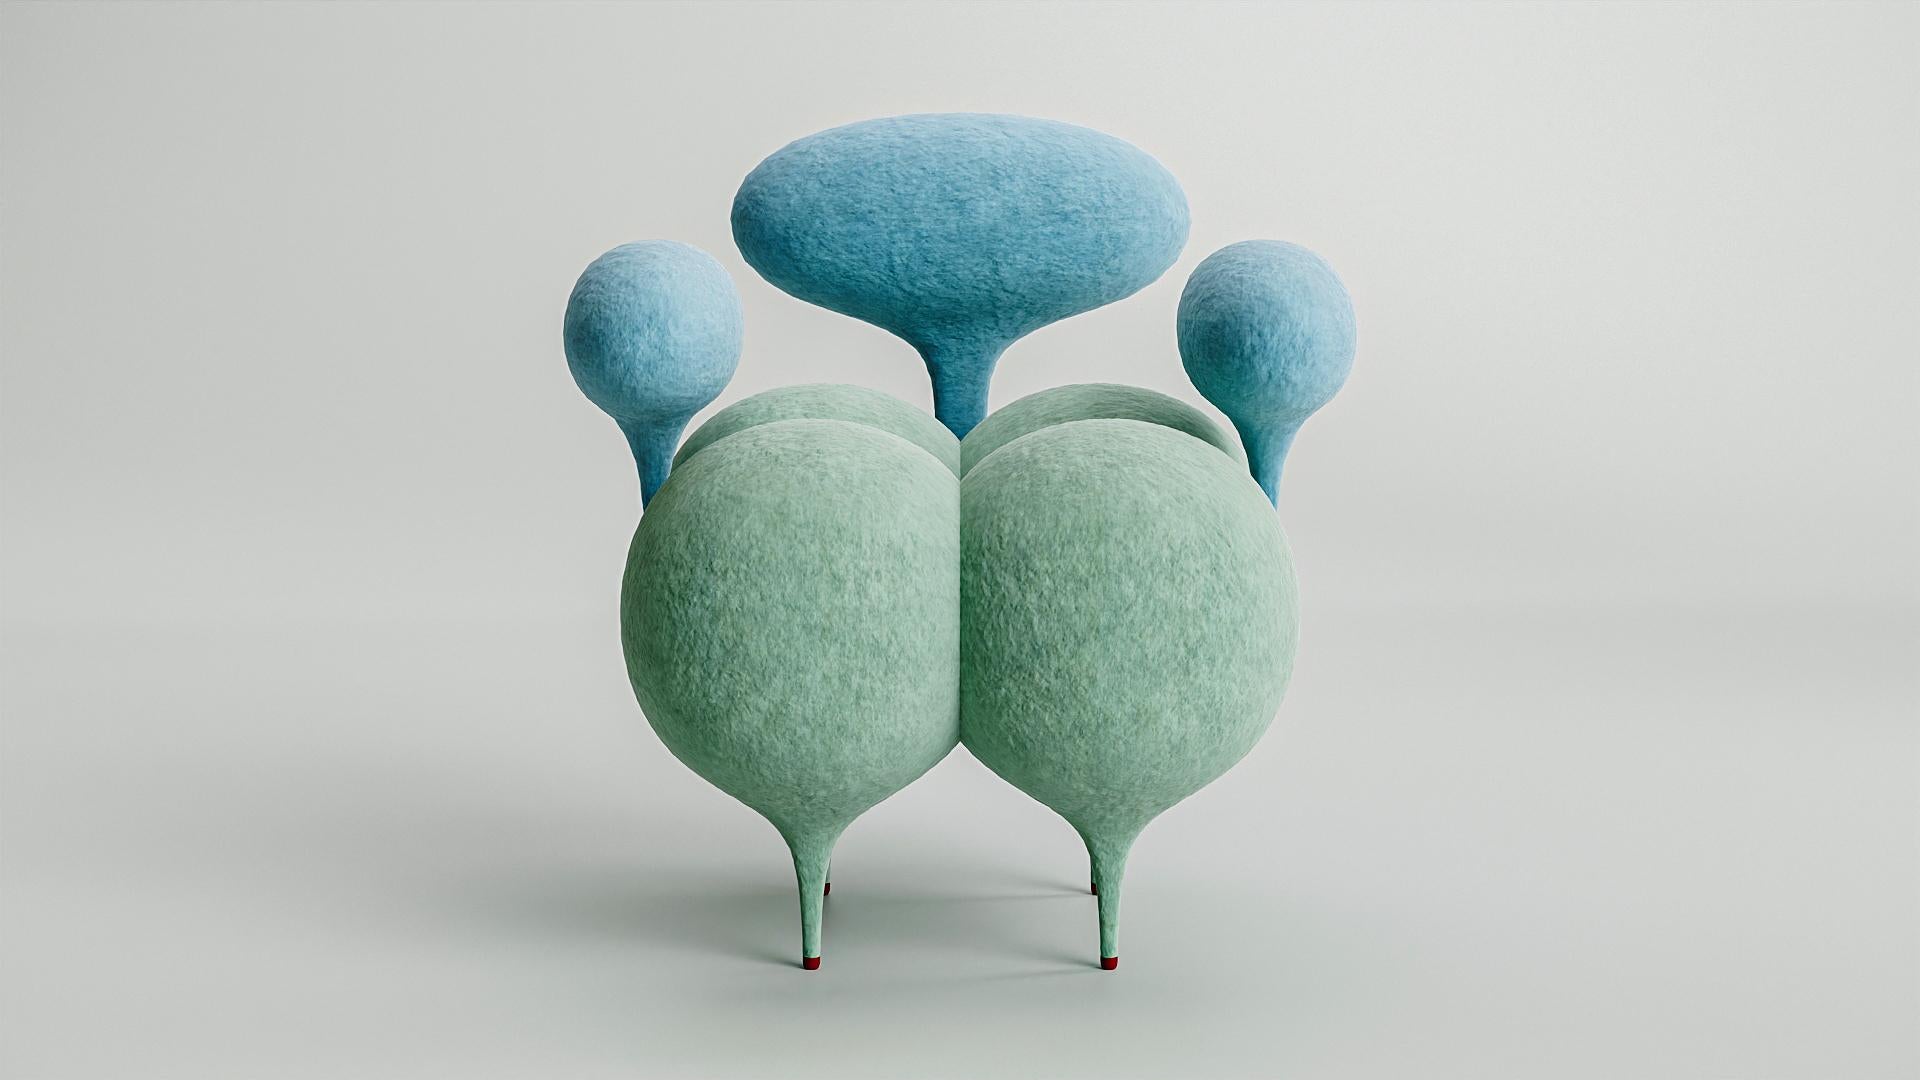 The chair is a collectible design piece, merging external aesthetics with practical comfort. Its whimsical contours, resembling the carnivorous plant 